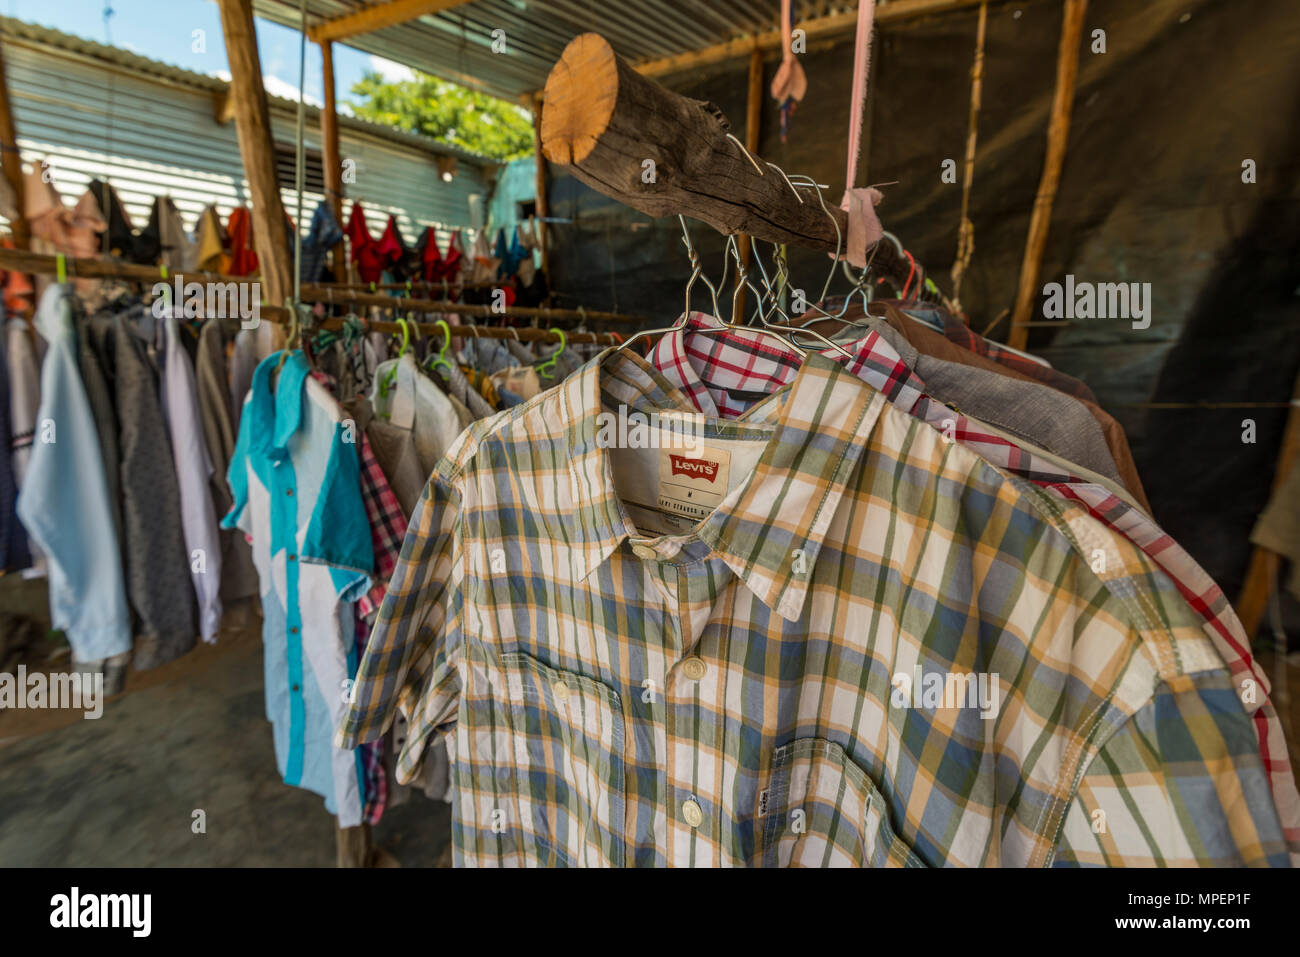 A tourist browses clothes in an informal shop in Inhassoro Mozambique. Stock Photo